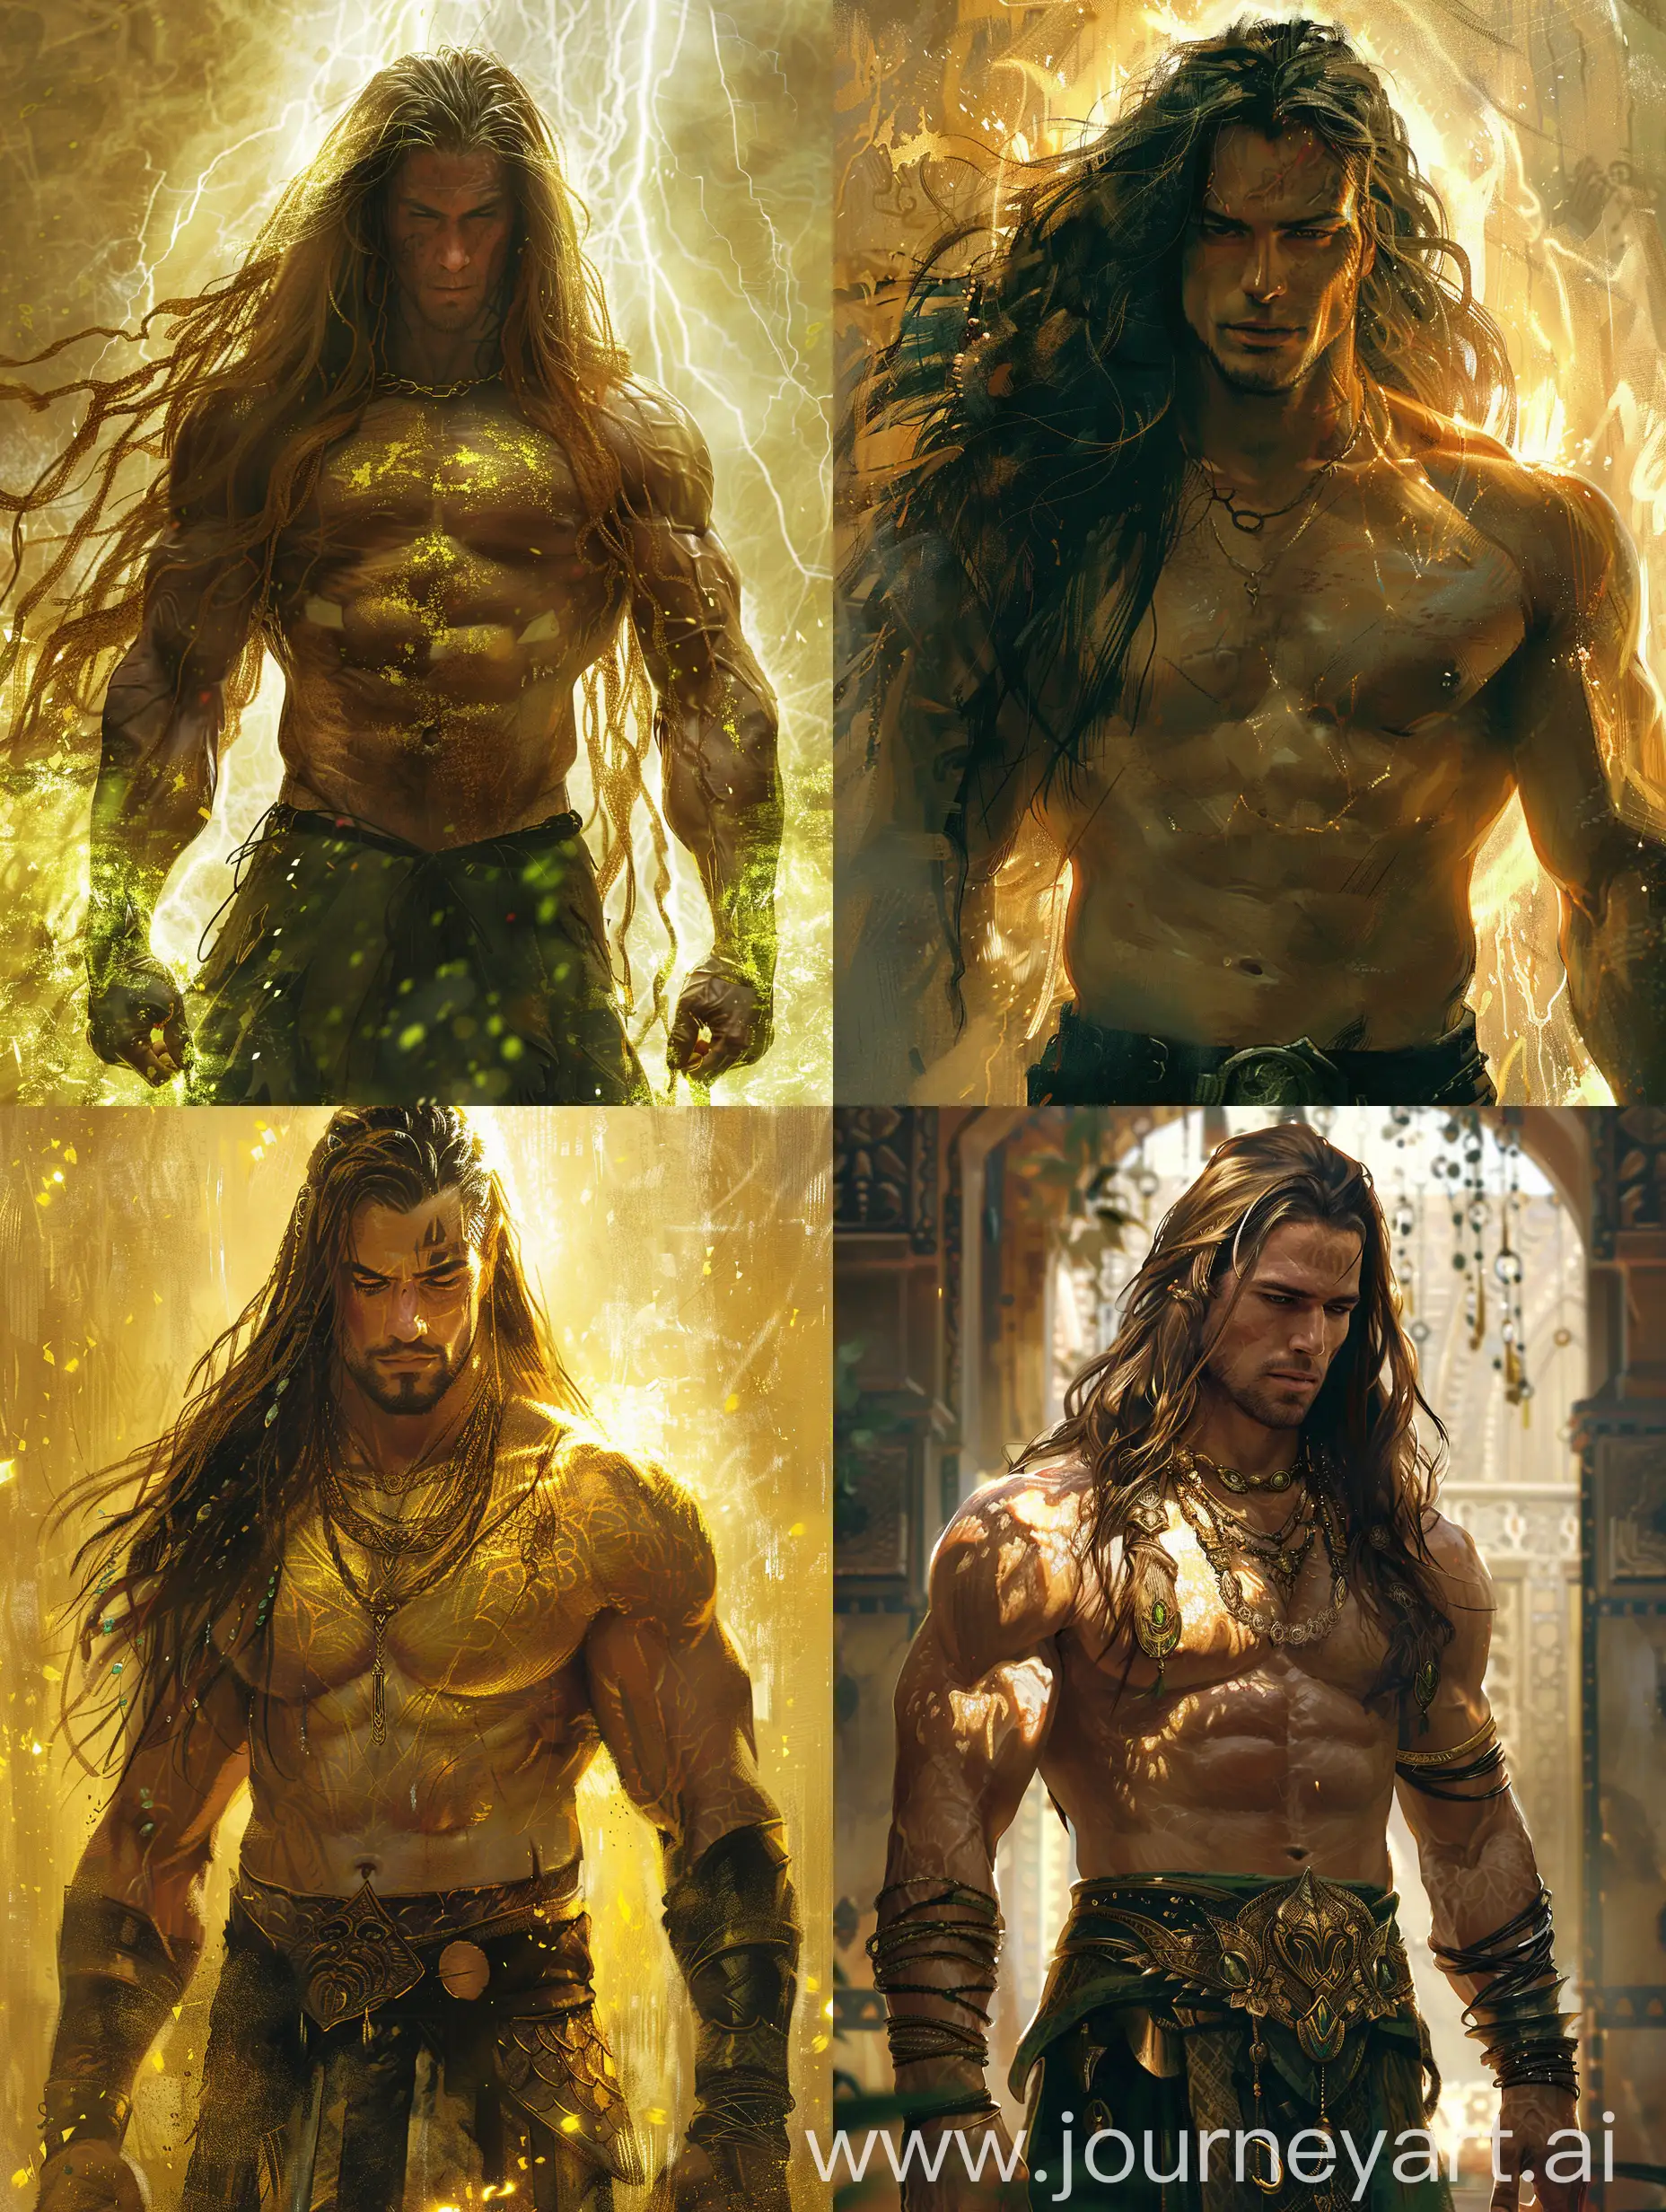 Mythic-God-of-Infinite-Power-with-Glowing-Skin-and-Long-Hair